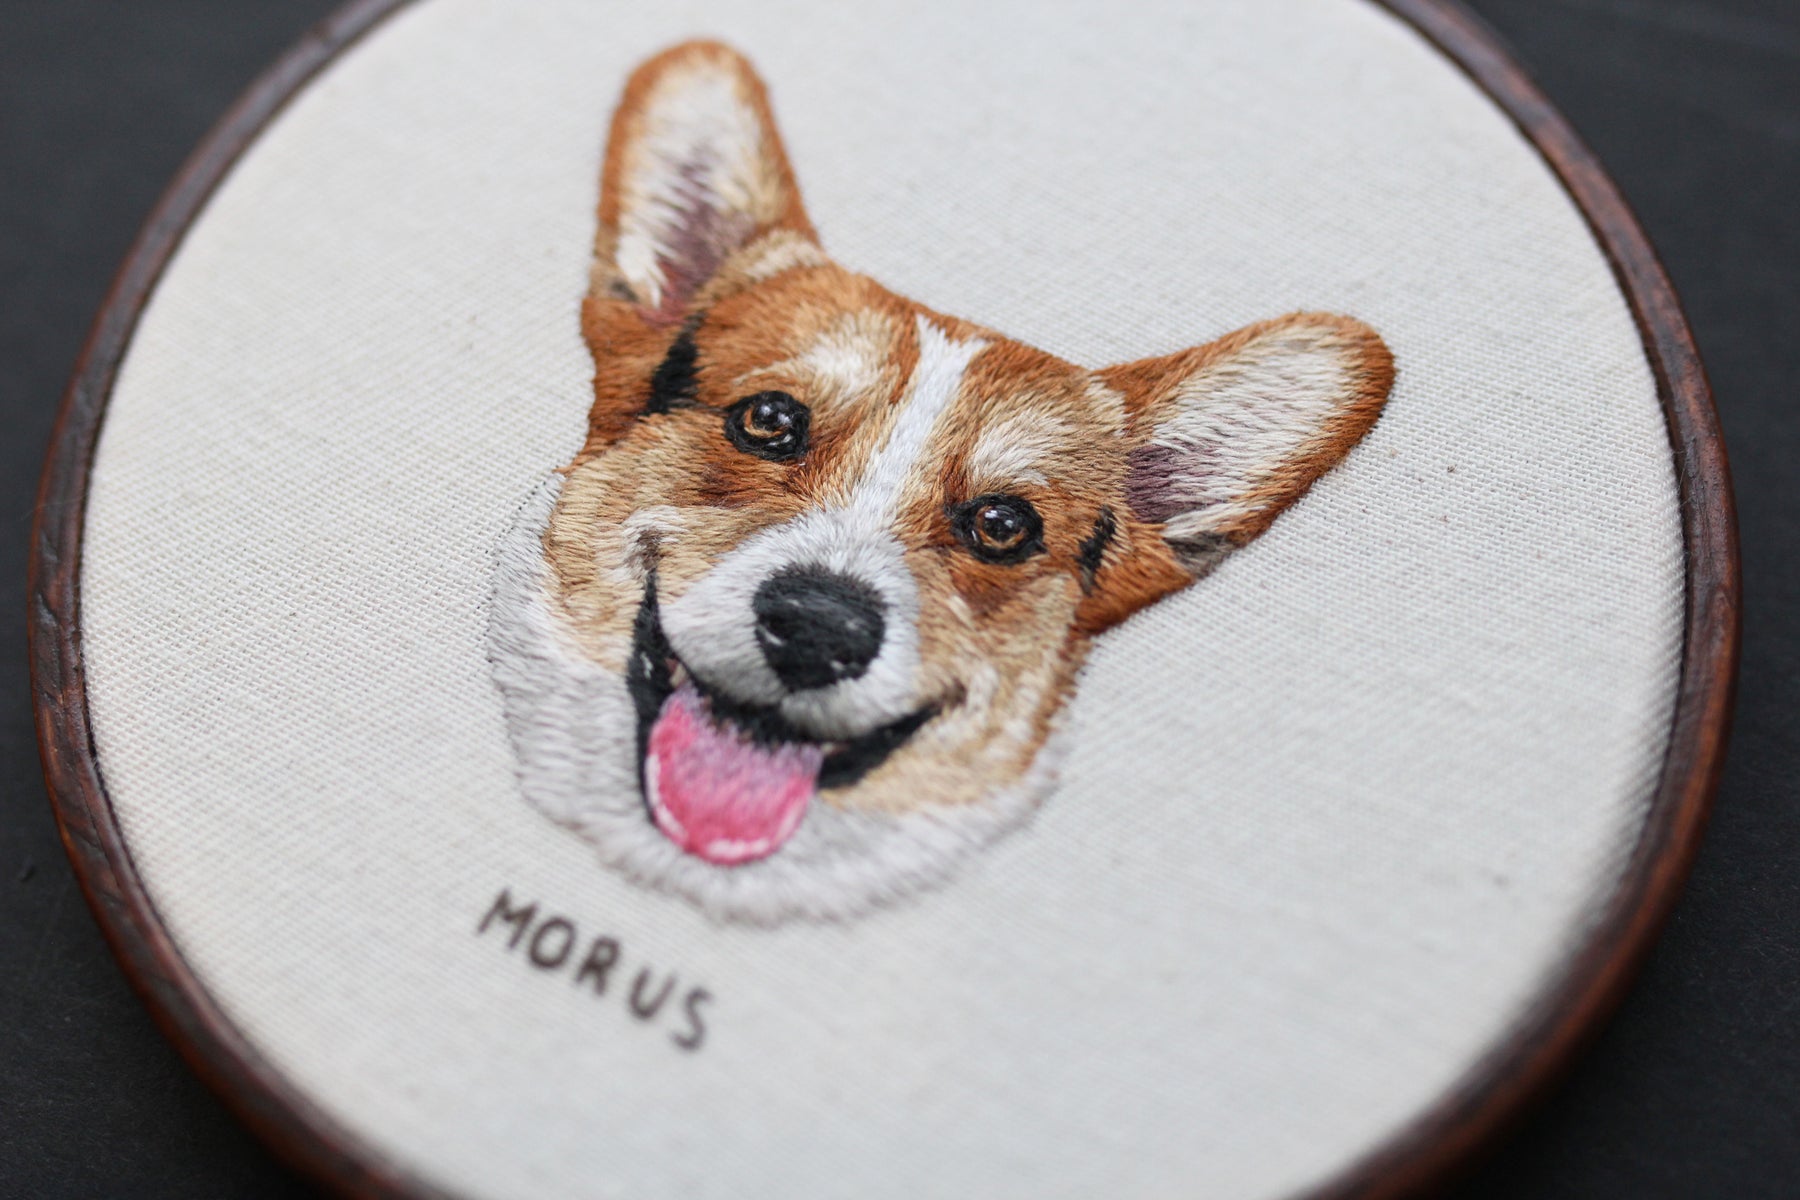 Morus Monthly: Embroidered Pet Portraits by Emillie Ferris